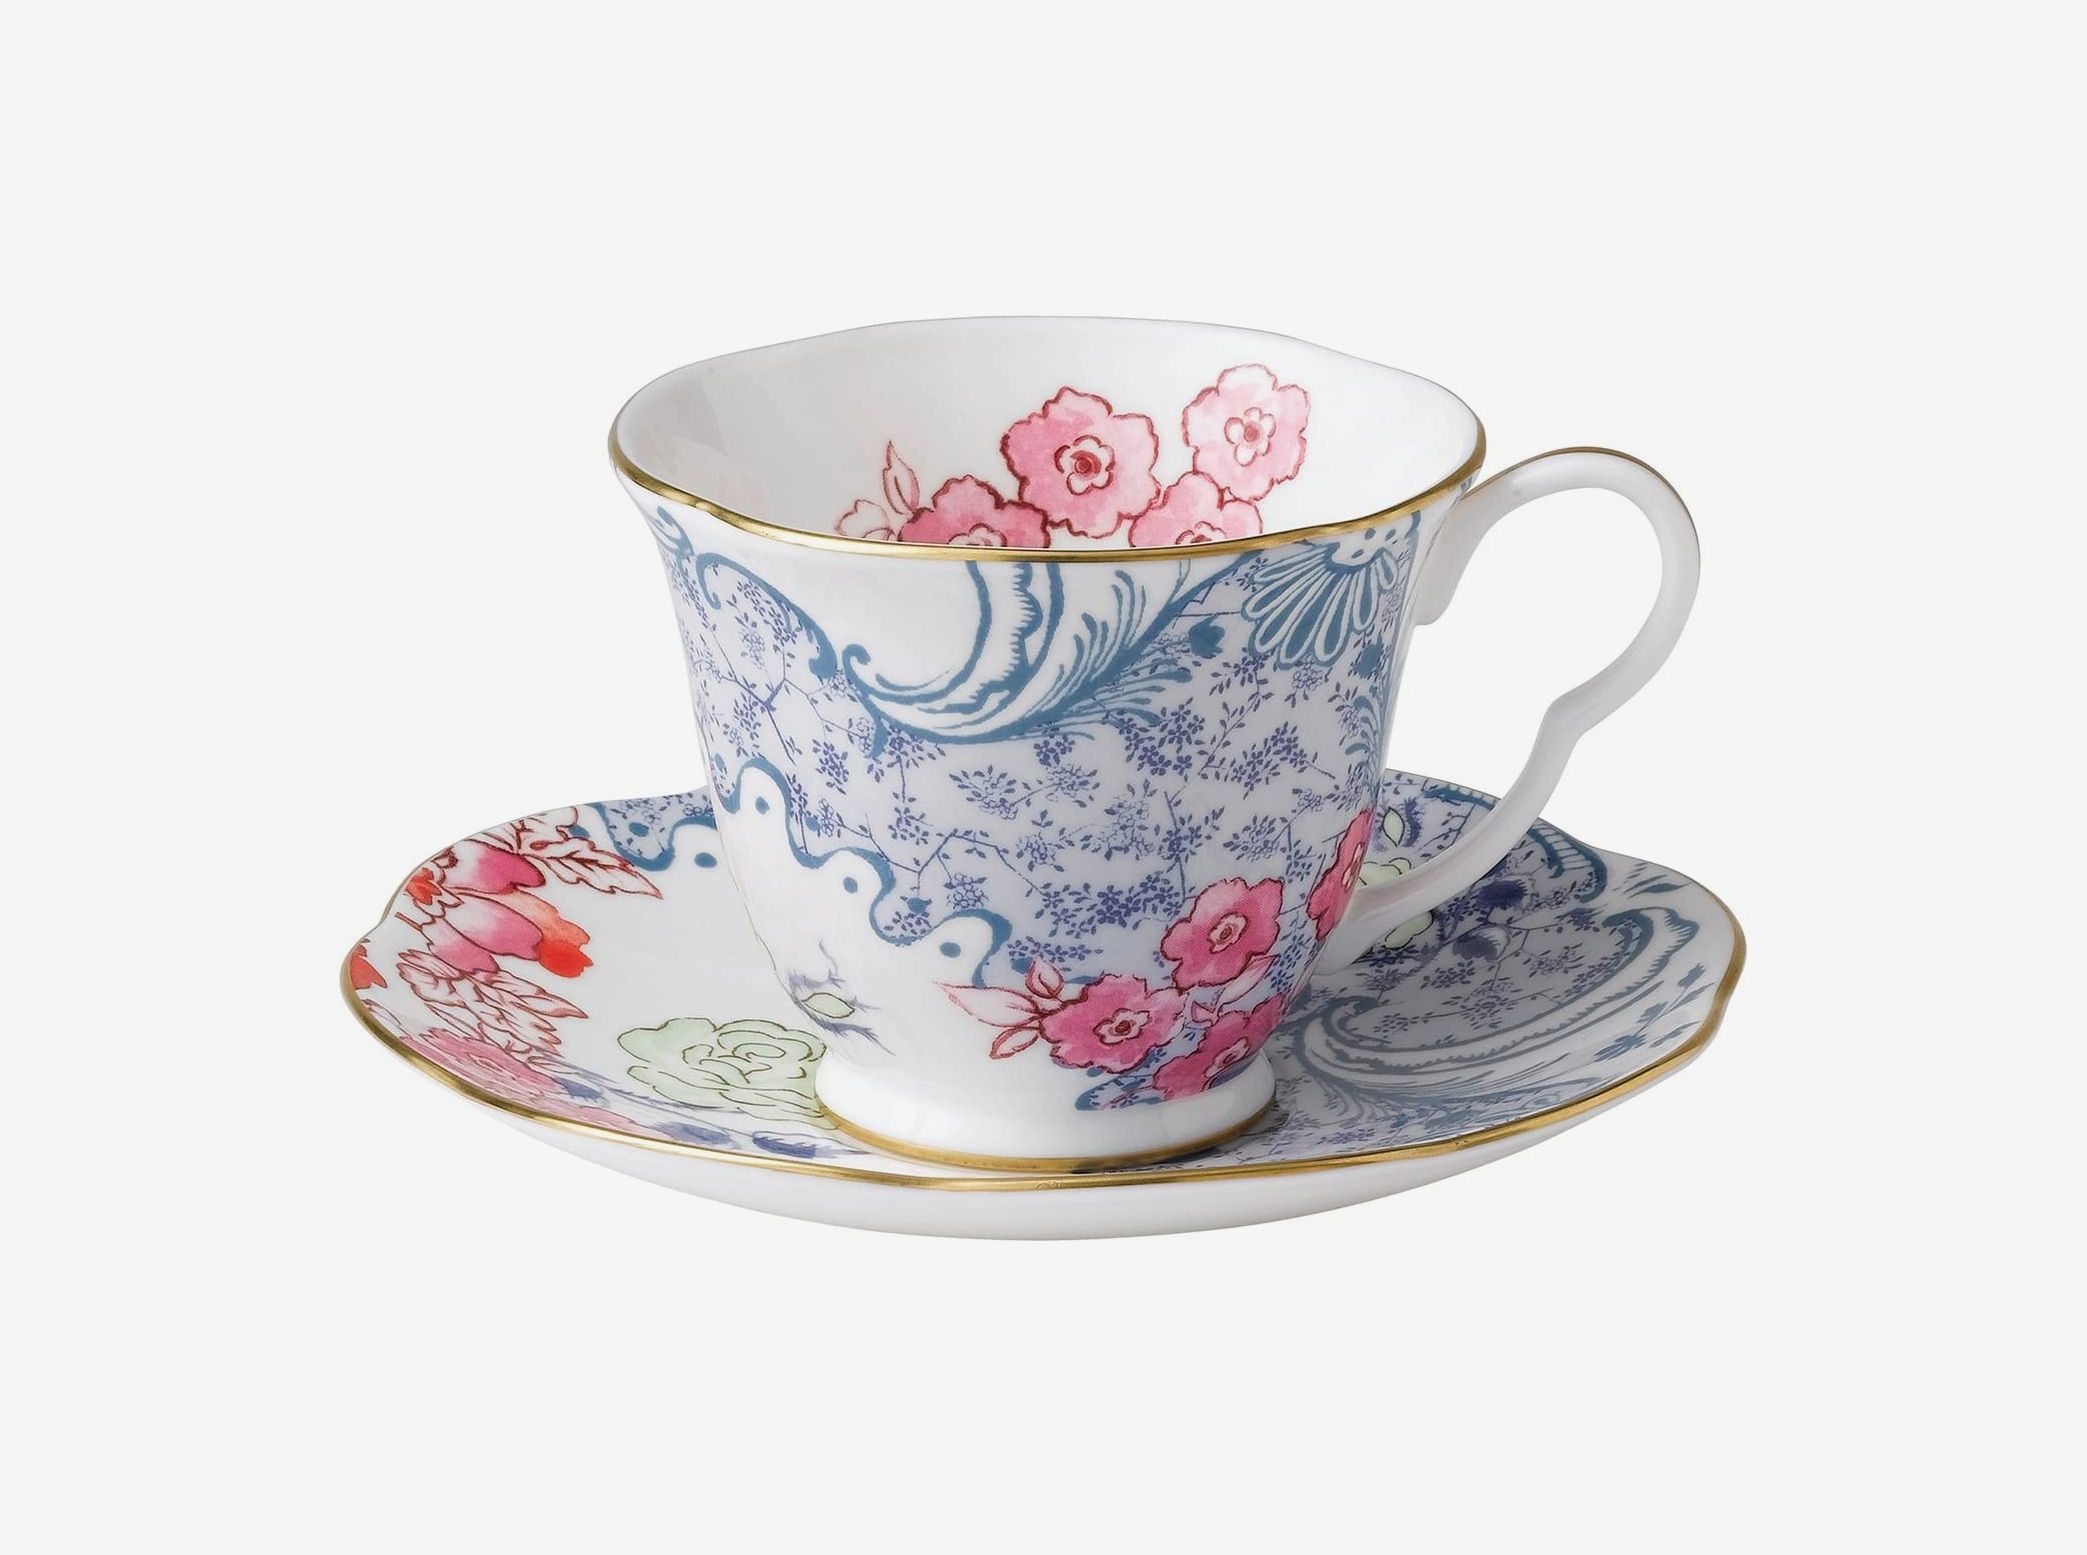 Chinese Tea Tasting Cup Half Oz 4 Mix Tasting Cup White Cups with flowers